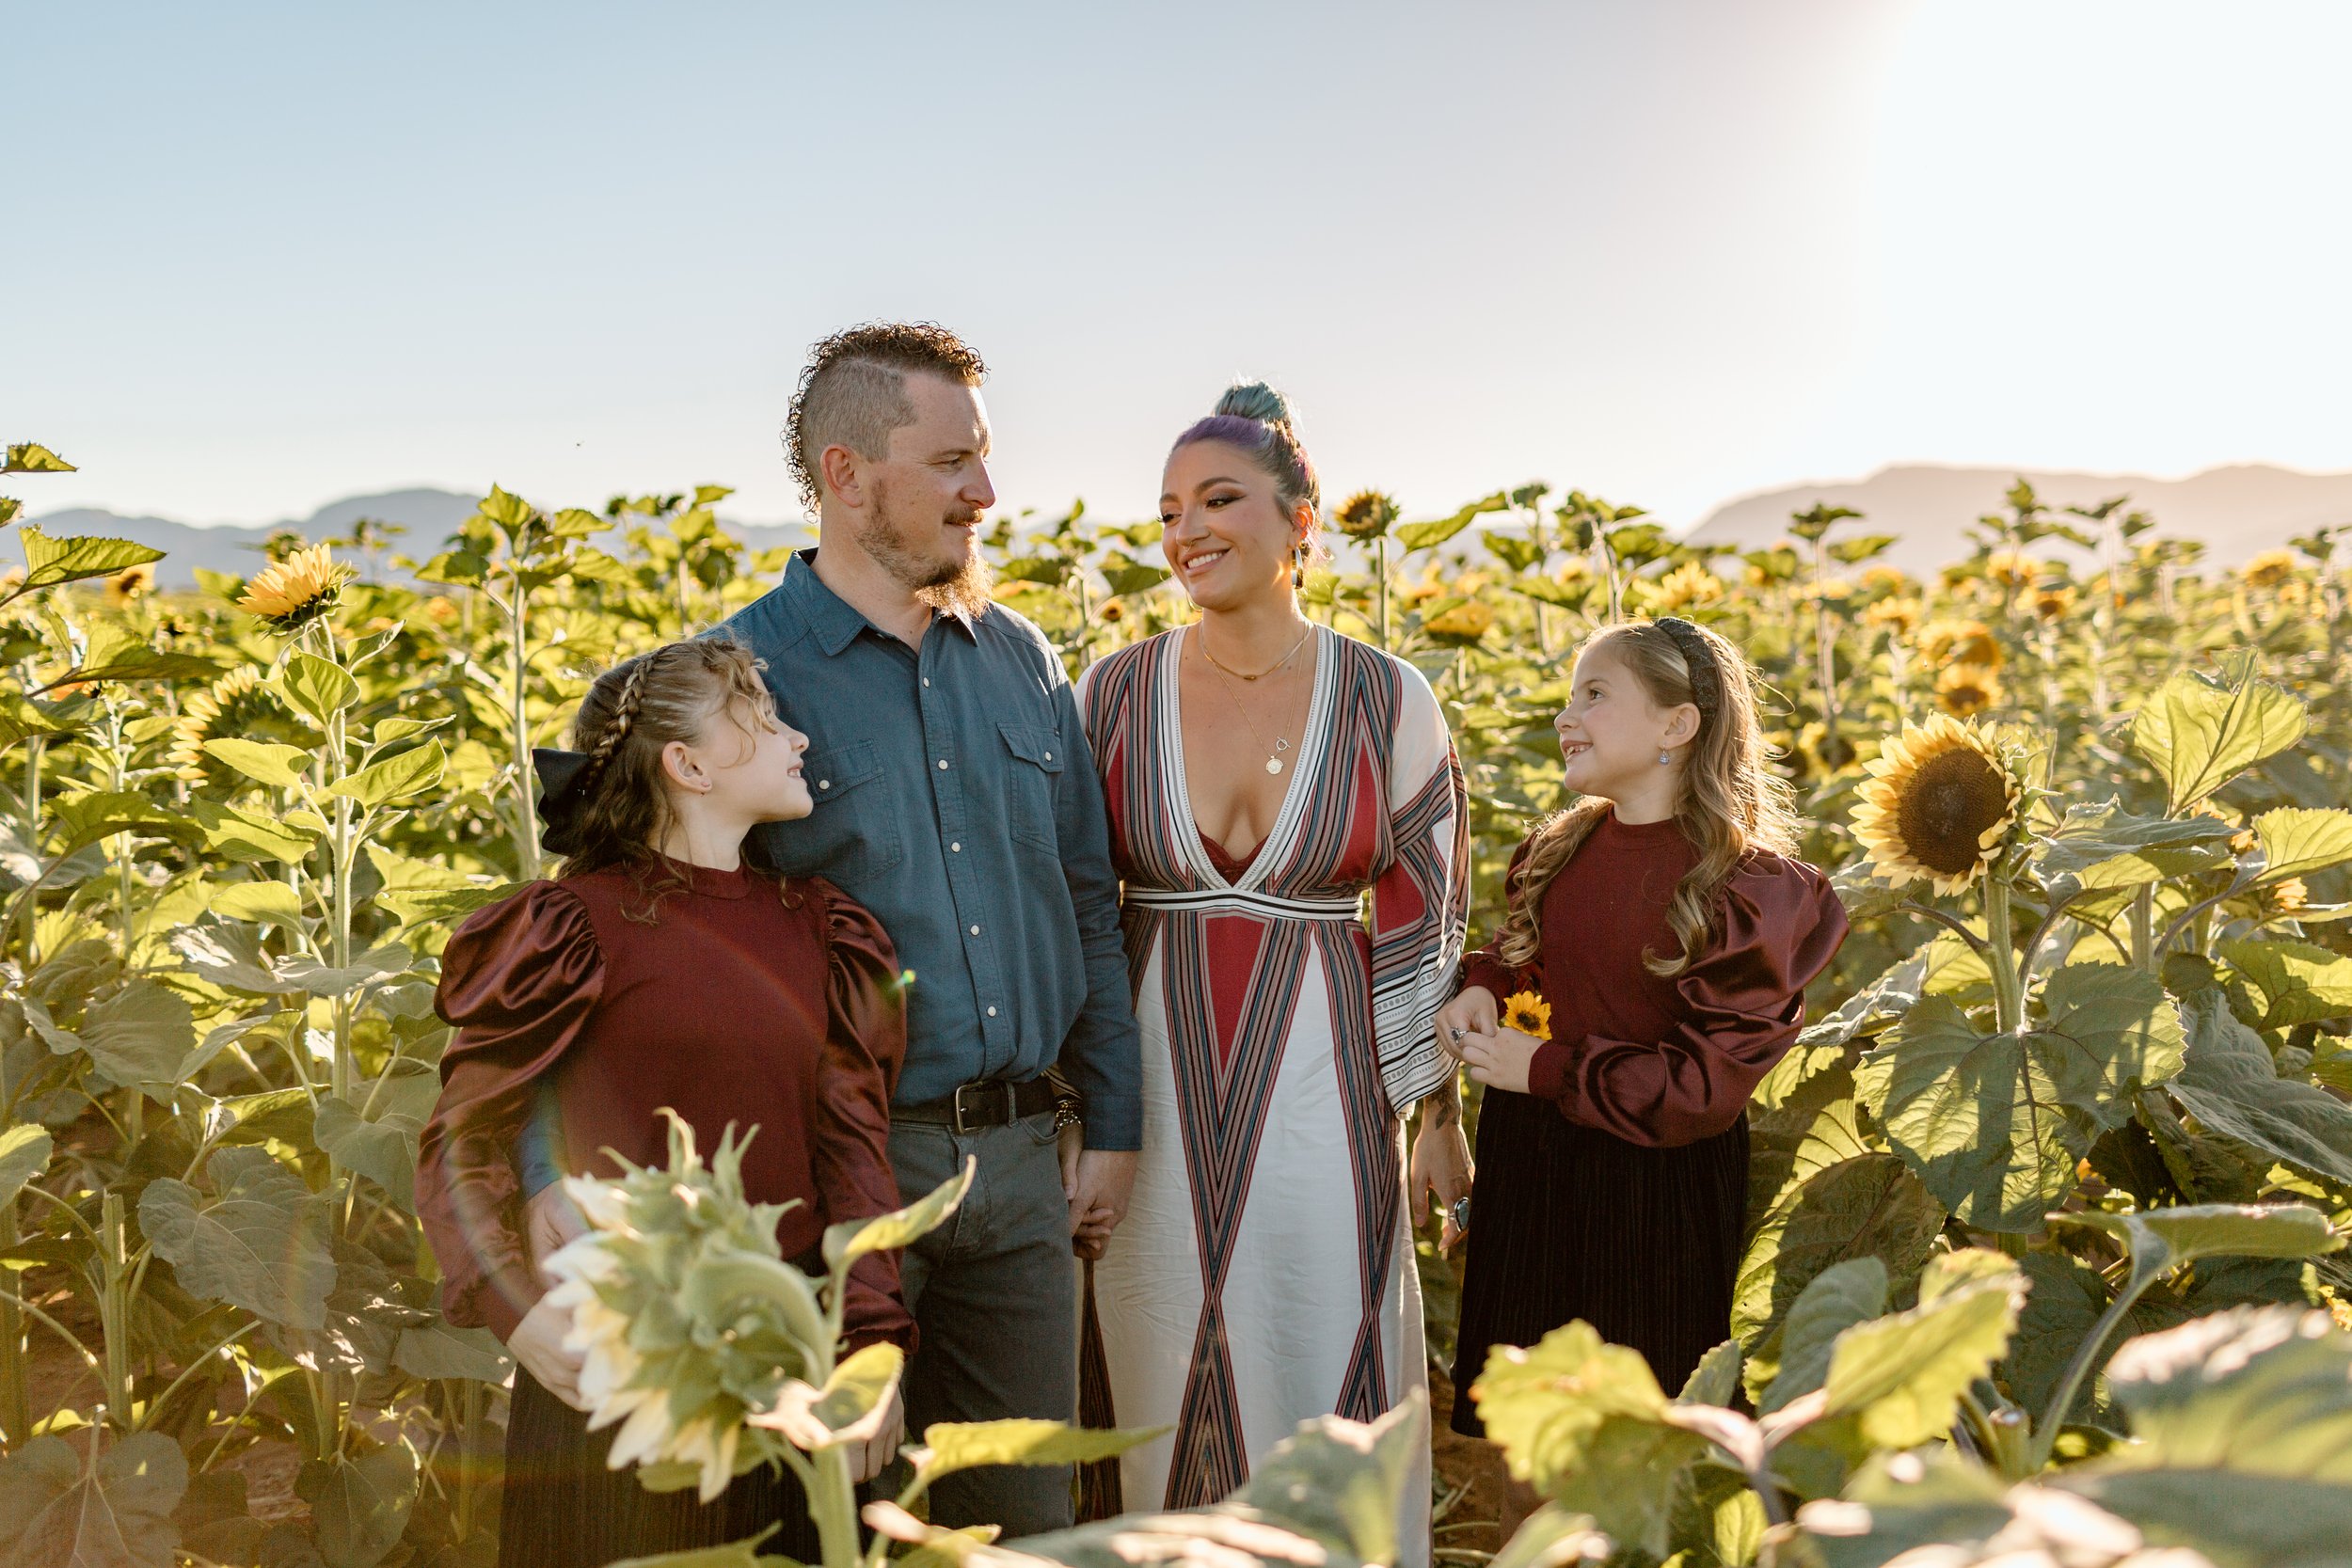  parents and two daughters smile at each other in a field of sunflowers 